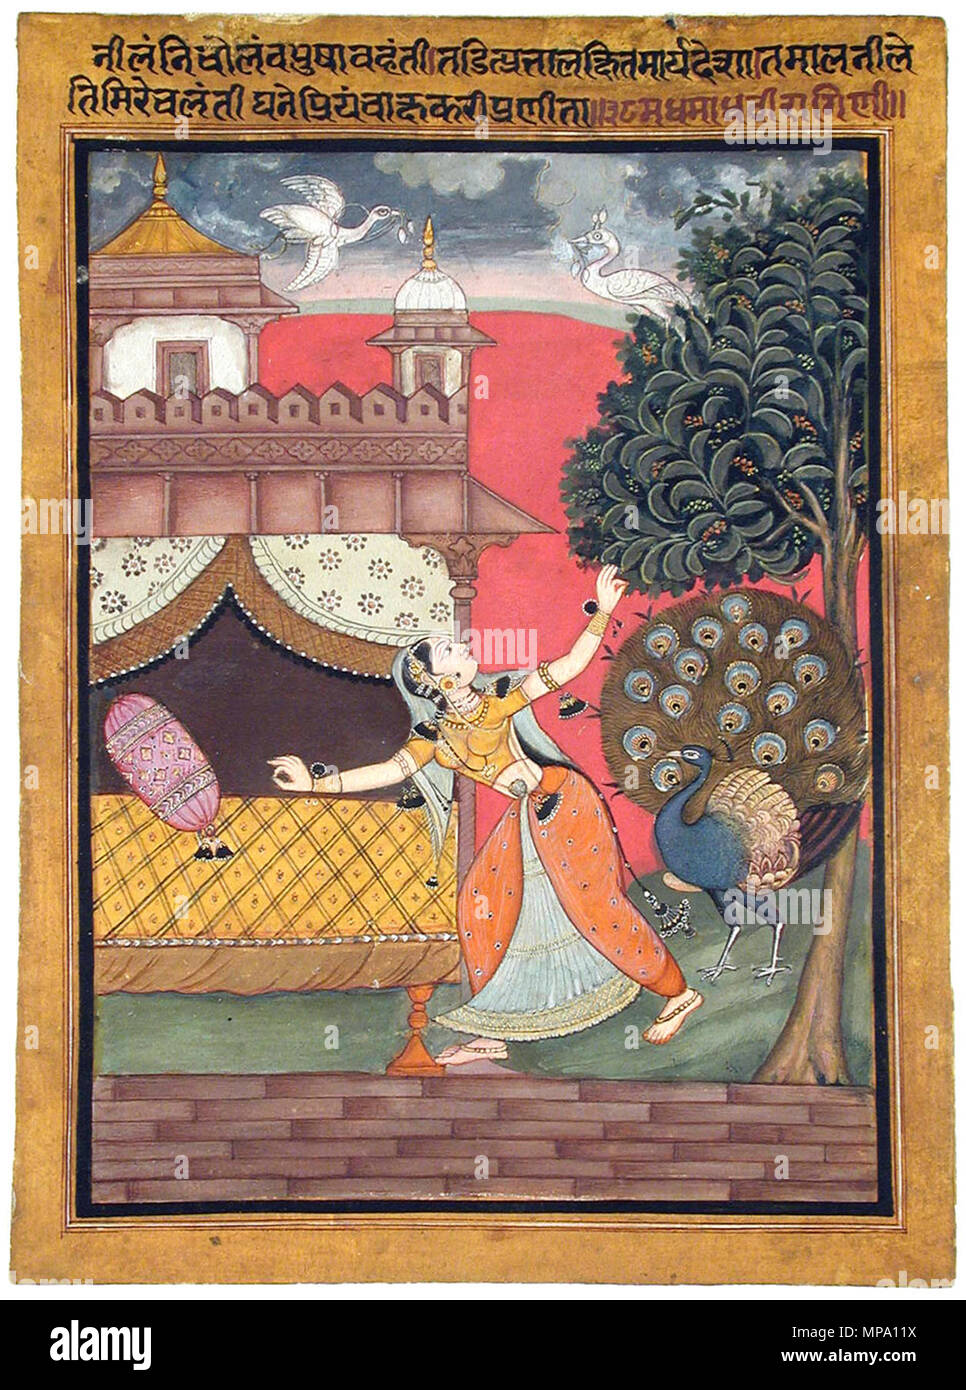 . English: Series Title: Ragamala Suite Name: Ragamala Display Artist: Shiv Chand Creation Date: ca. 1610 Display Dimensions: 8 13/16 in. x 6 3/8 in. (22.4 cm x 16.2 cm) Credit Line: Edwin Binney 3rd Collection Accession Number: 1990.319 Collection: <a href='http://www.sdmart.org/art/our-collection/asian-art' rel='nofollow'>The San Diego Museum of Art</a> . 2 October 2001, 13:59:29. English: thesandiegomuseumofartcollection 839 Madhumadhavi Ragini of Bhairav (6125074858) Stock Photo